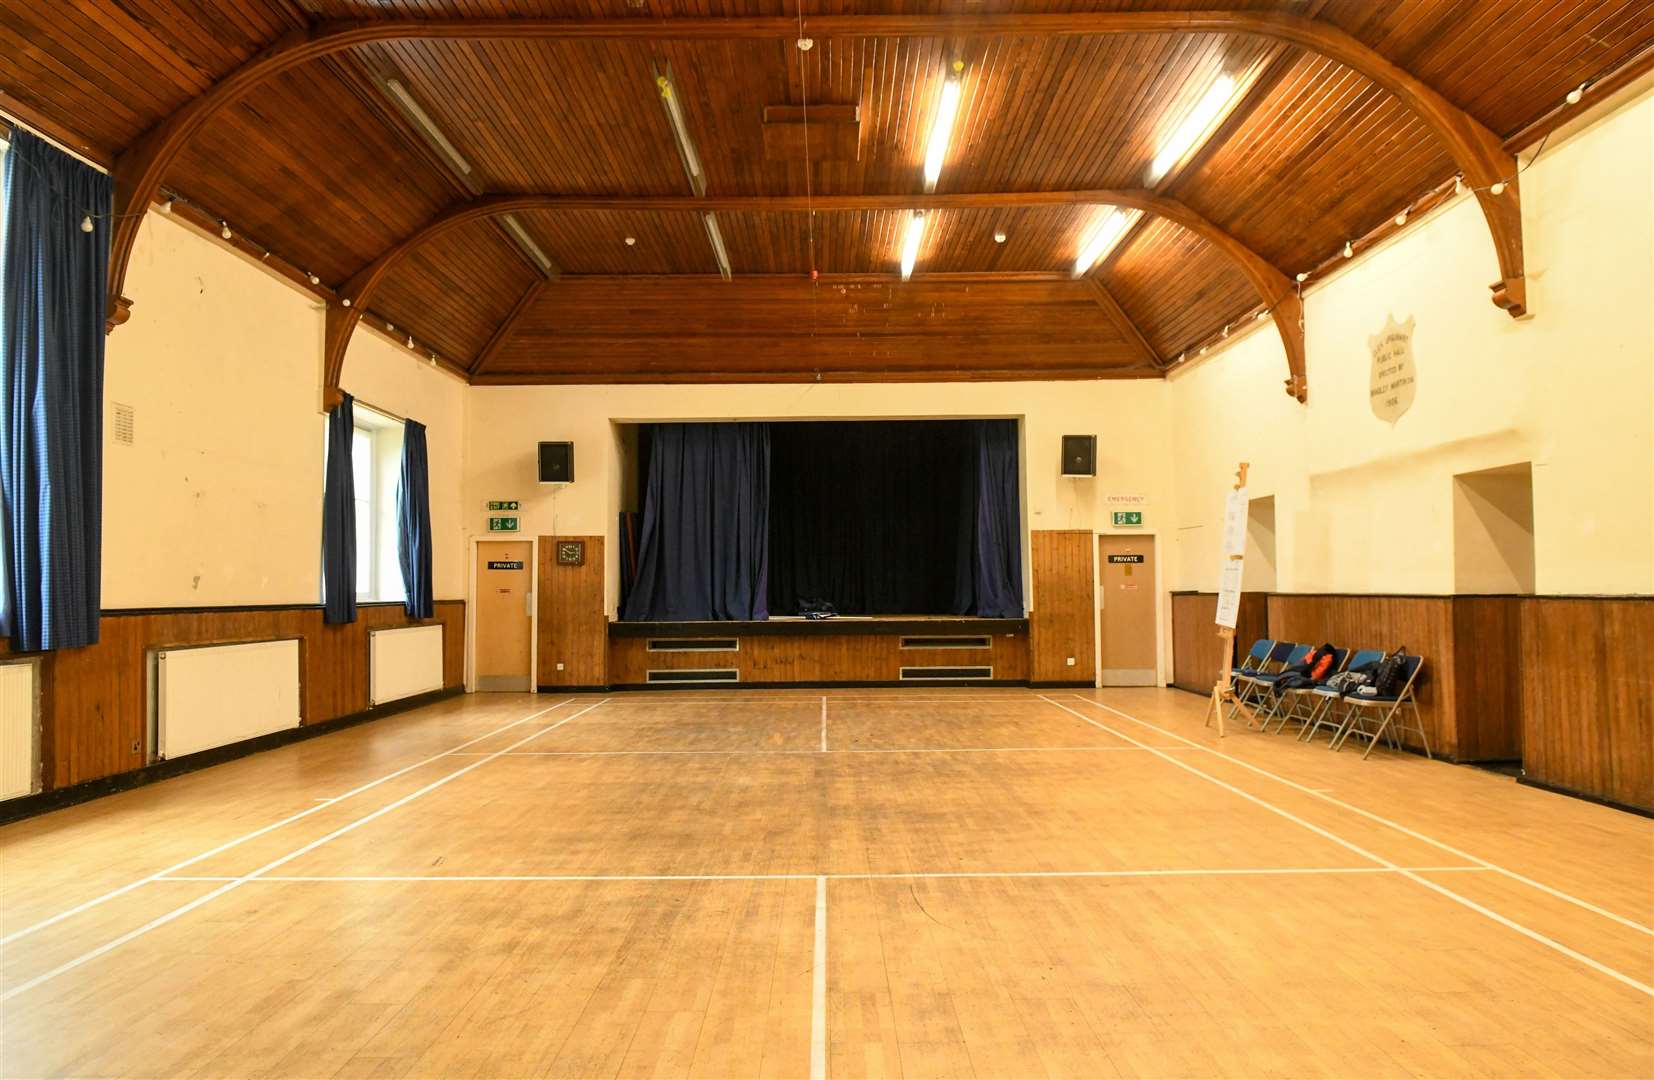 A major redesign is planned for Glenurquhart Public Hall.